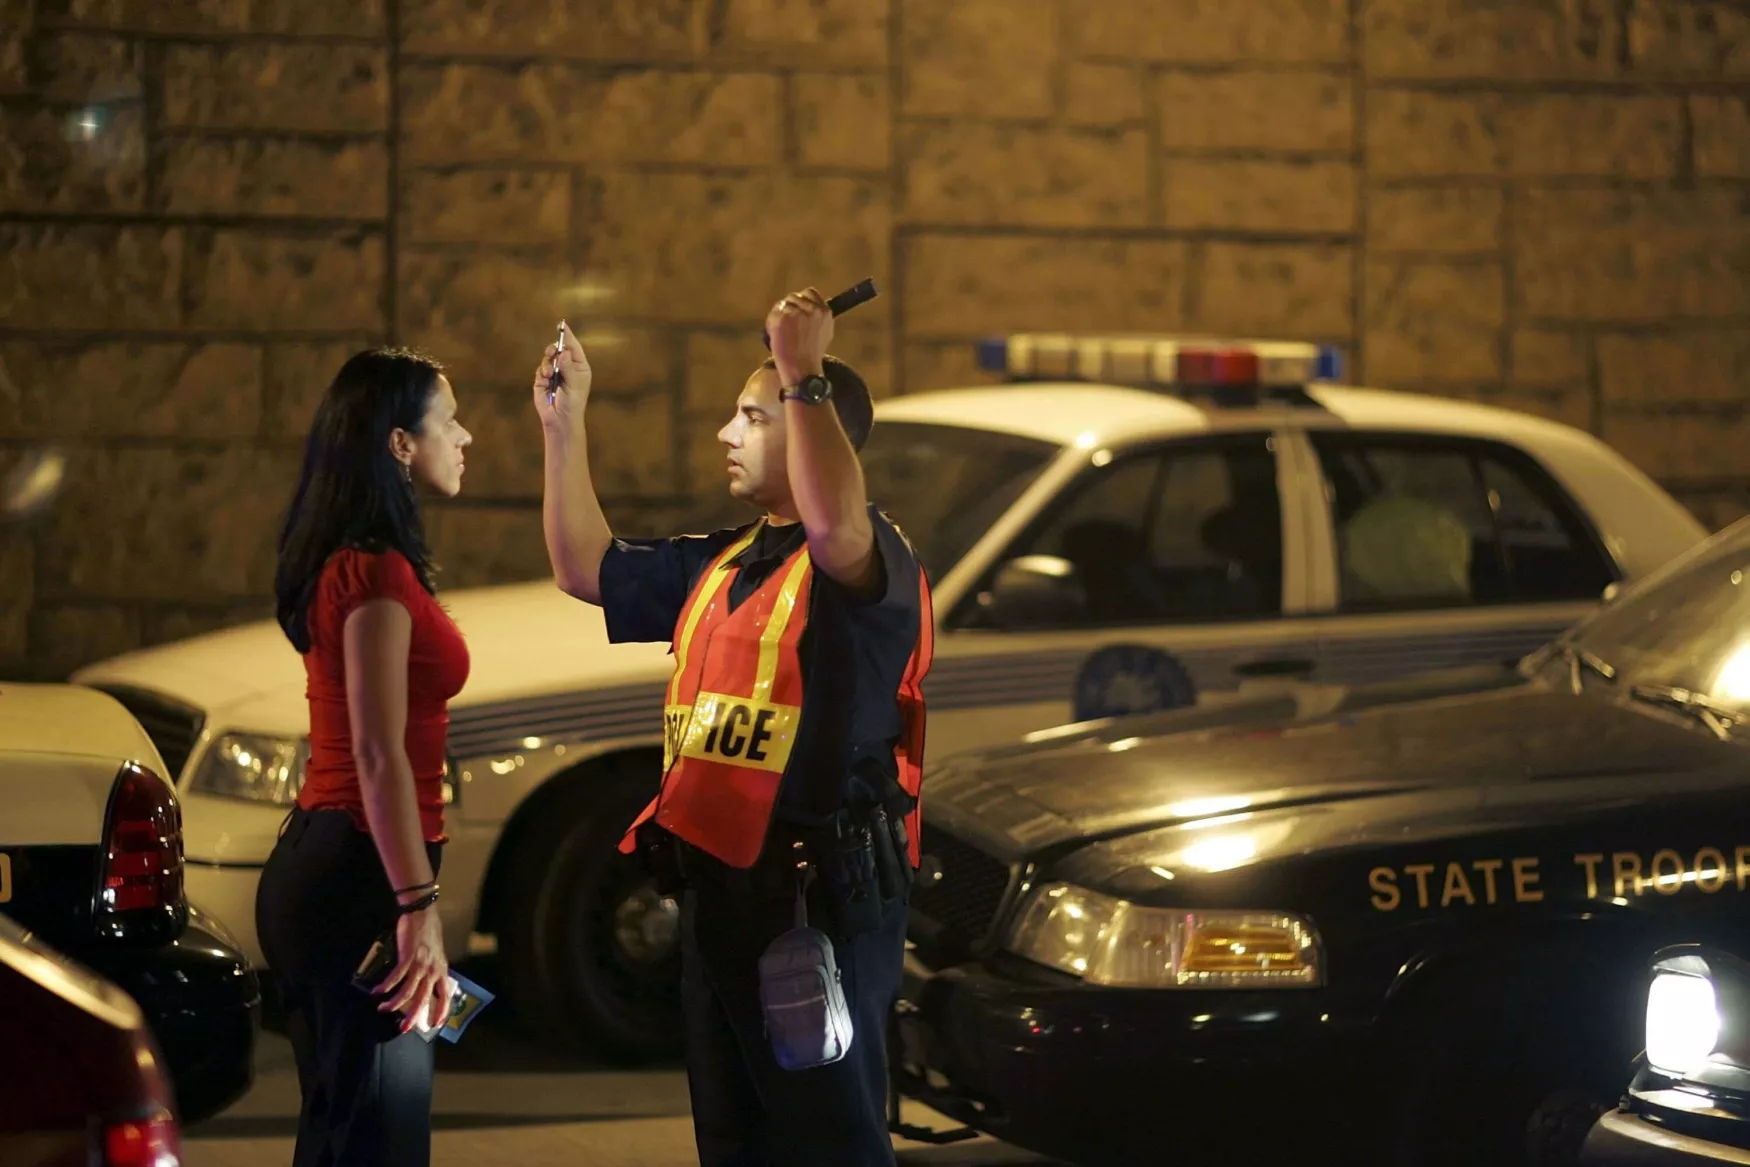 driving drunk and being convicted will result in a DUI class online